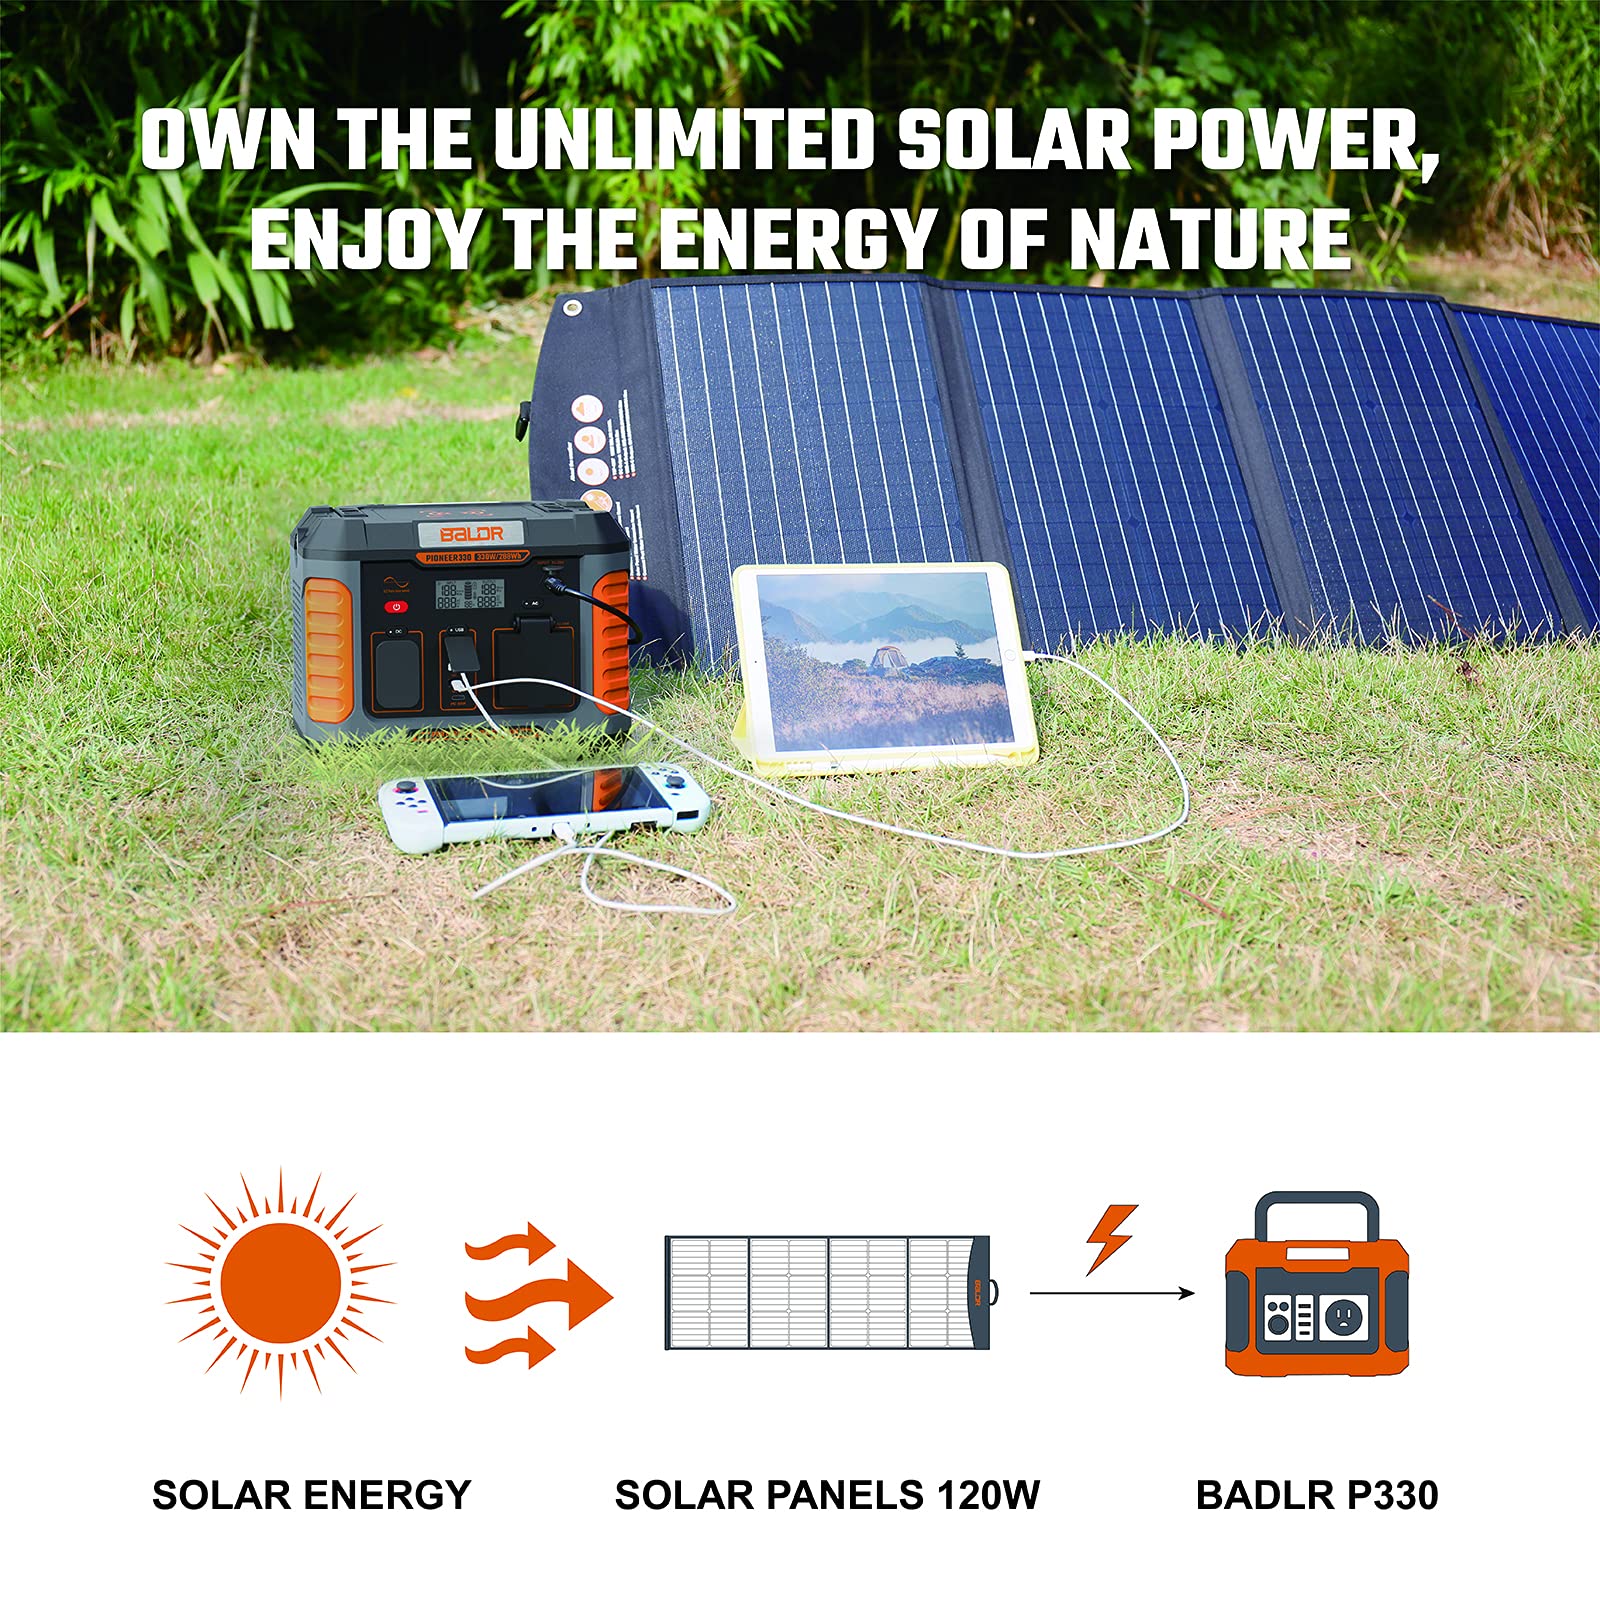 Baldr Solar Generator Kit，330W Portable Power Station with 120W Solar Panel Included Ideal for Home Backup, Emergency, Outdoor Camping.